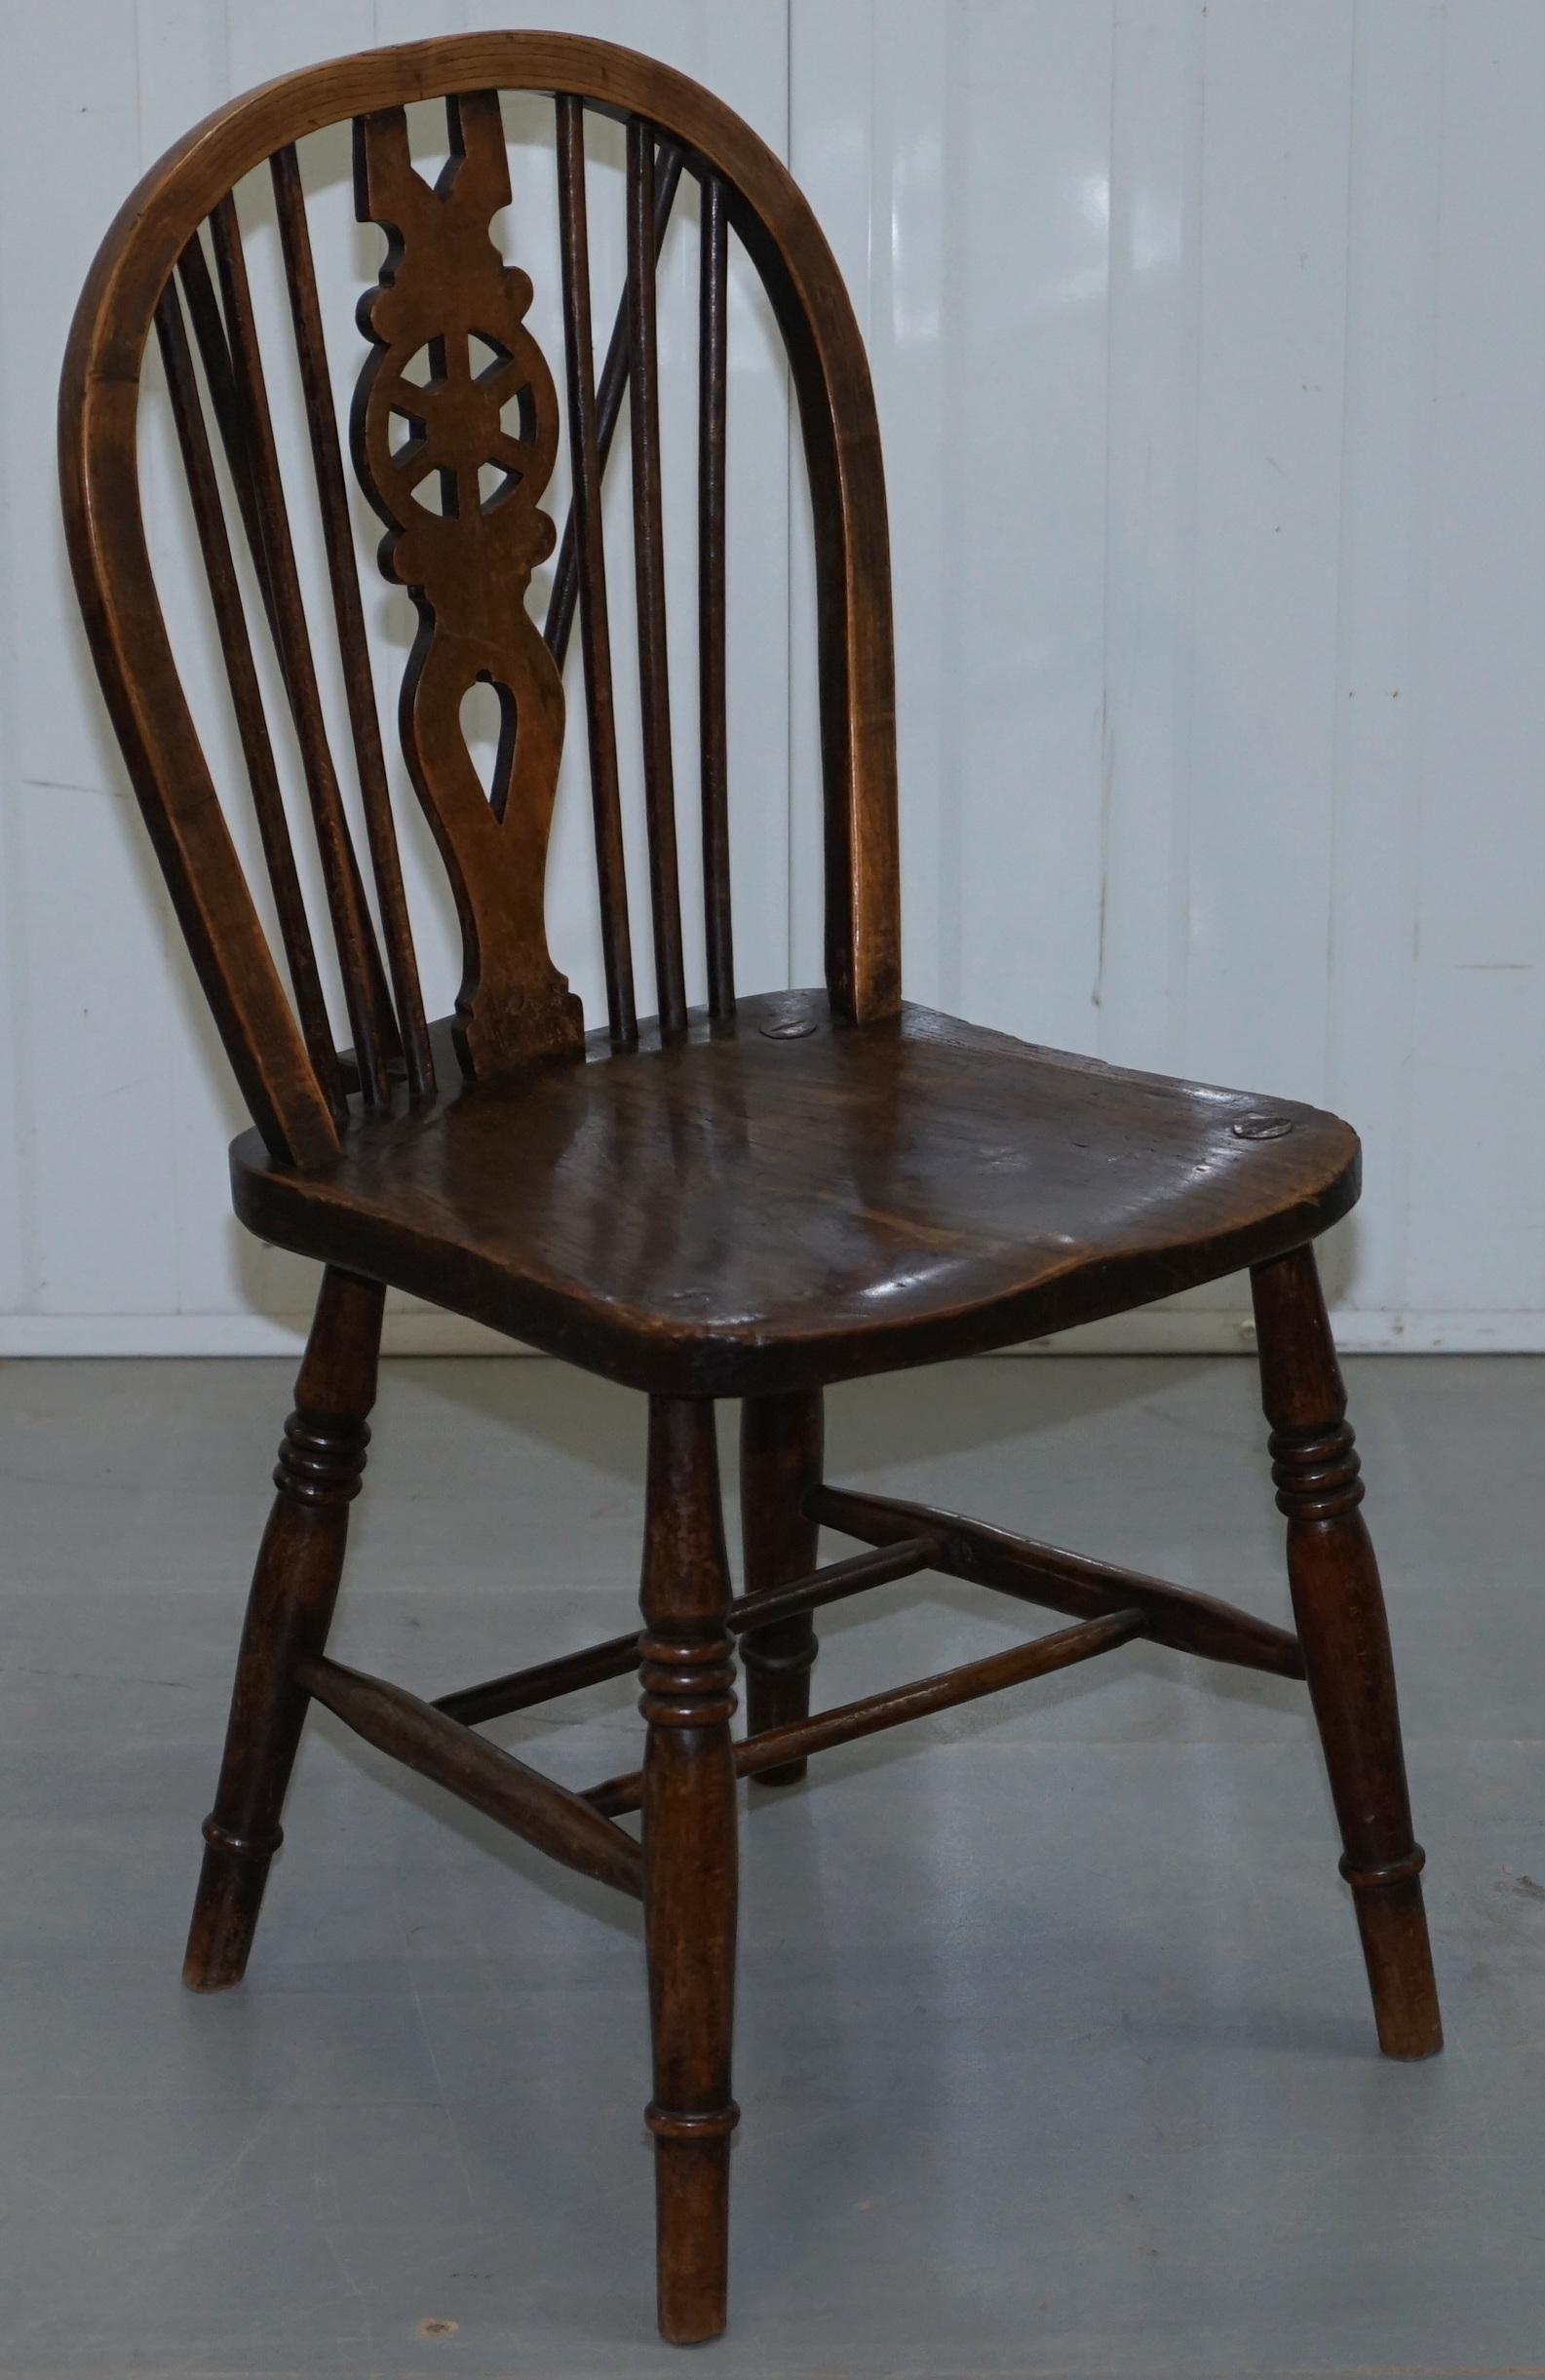 Rare Set of 6 Victorian 1840 Hoop Back Windsor Chairs High Wycombe, England 7